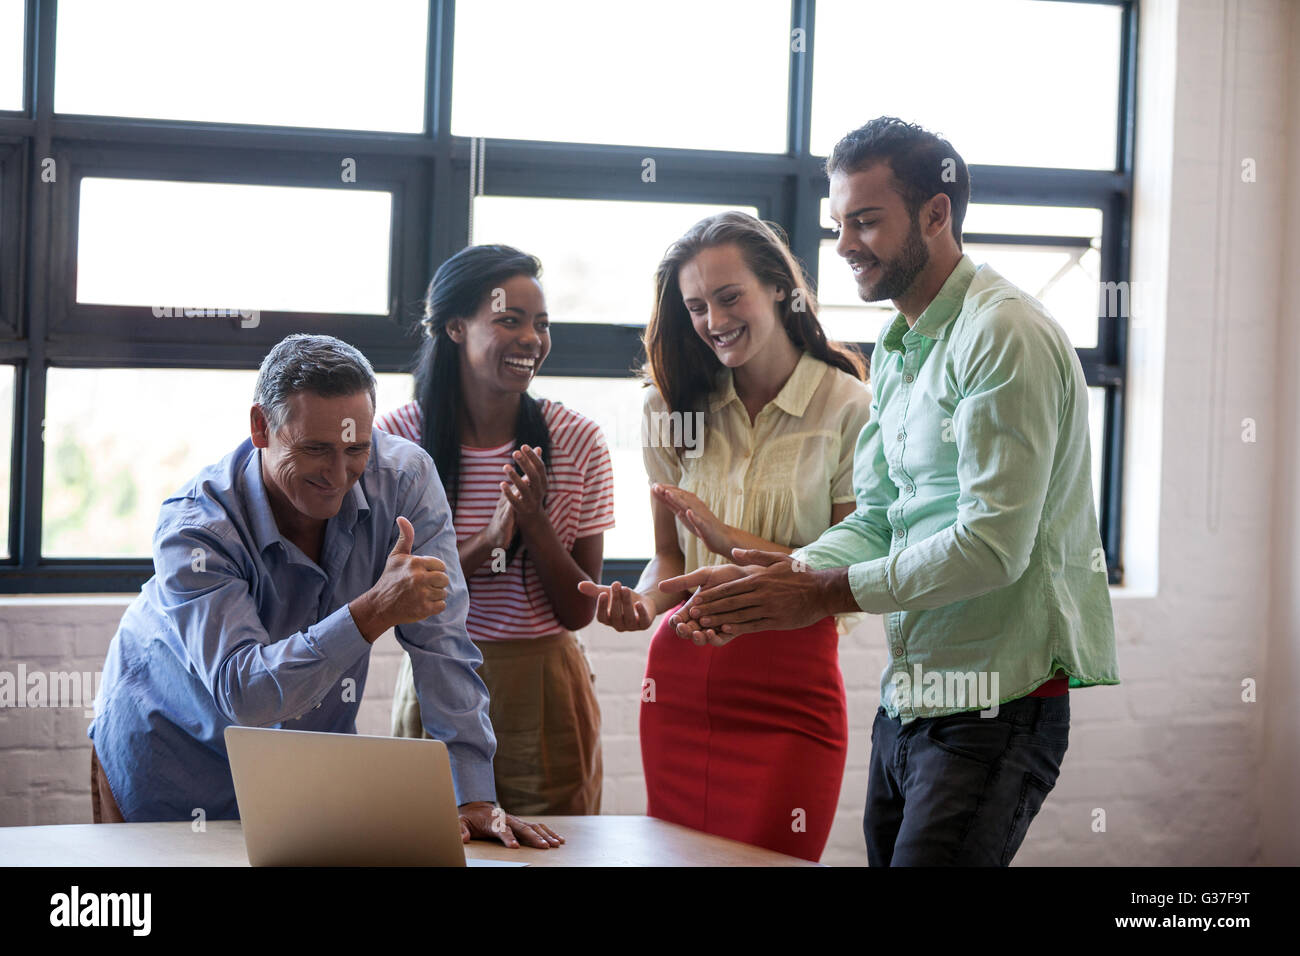 Business team congratulating themselves Stock Photo